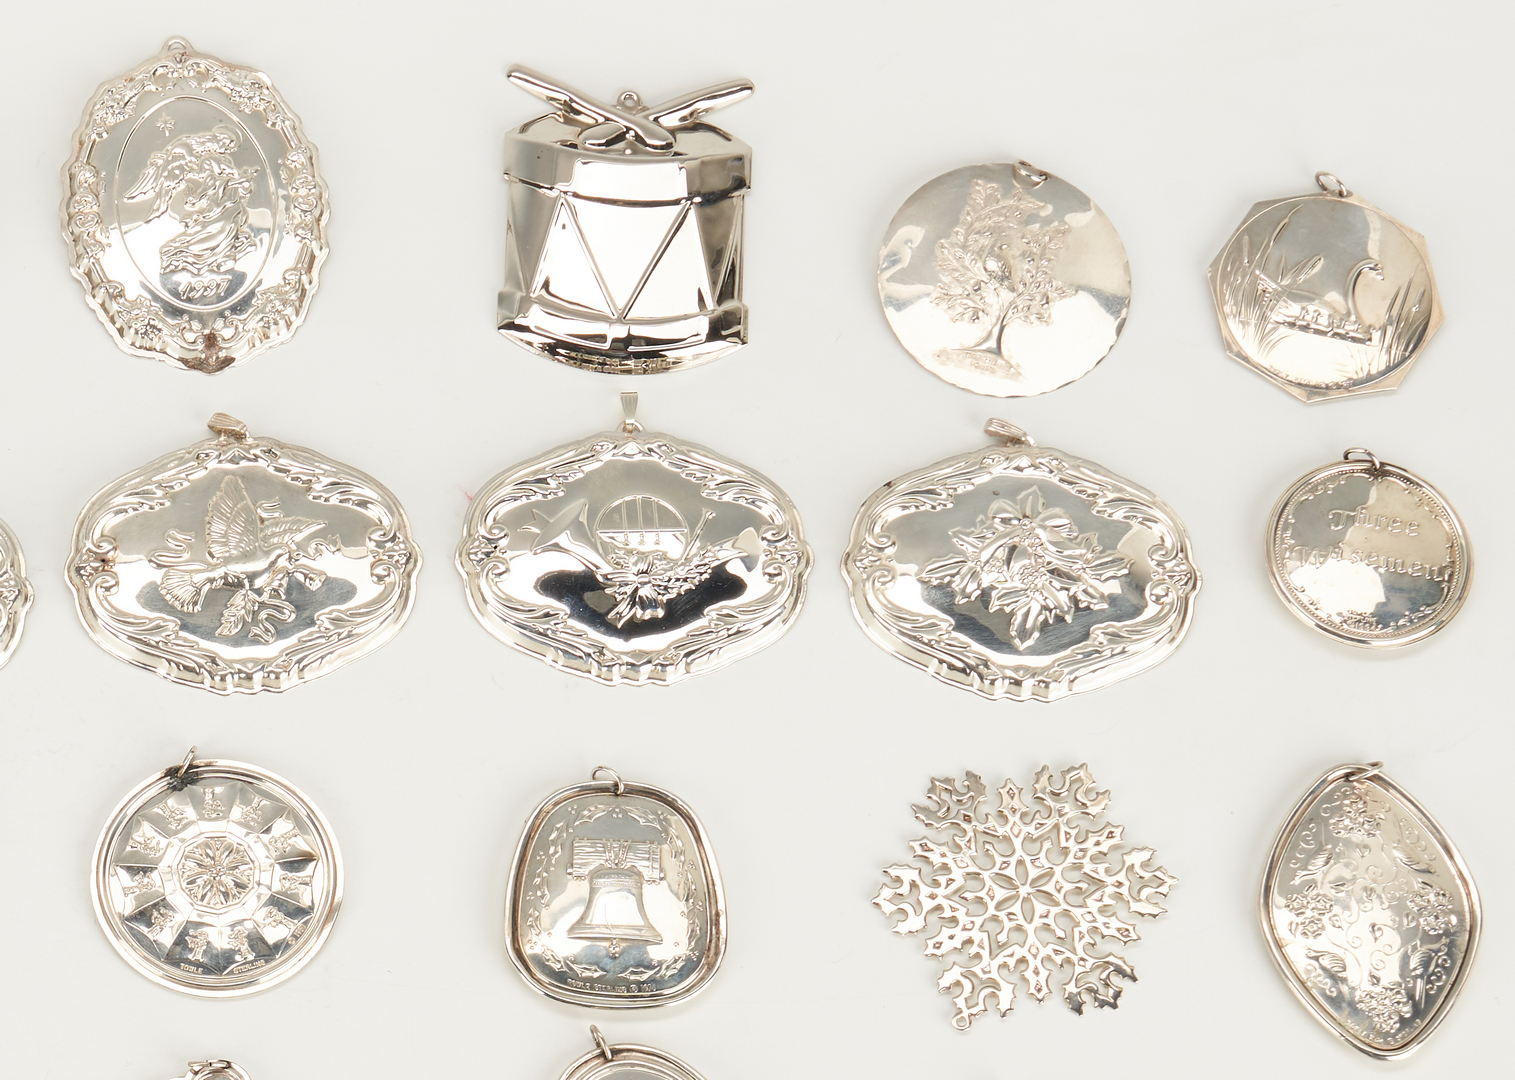 Lot 285: 45 Sterling Christmas Ornaments by Tiffany, Reed & Barton, Towle